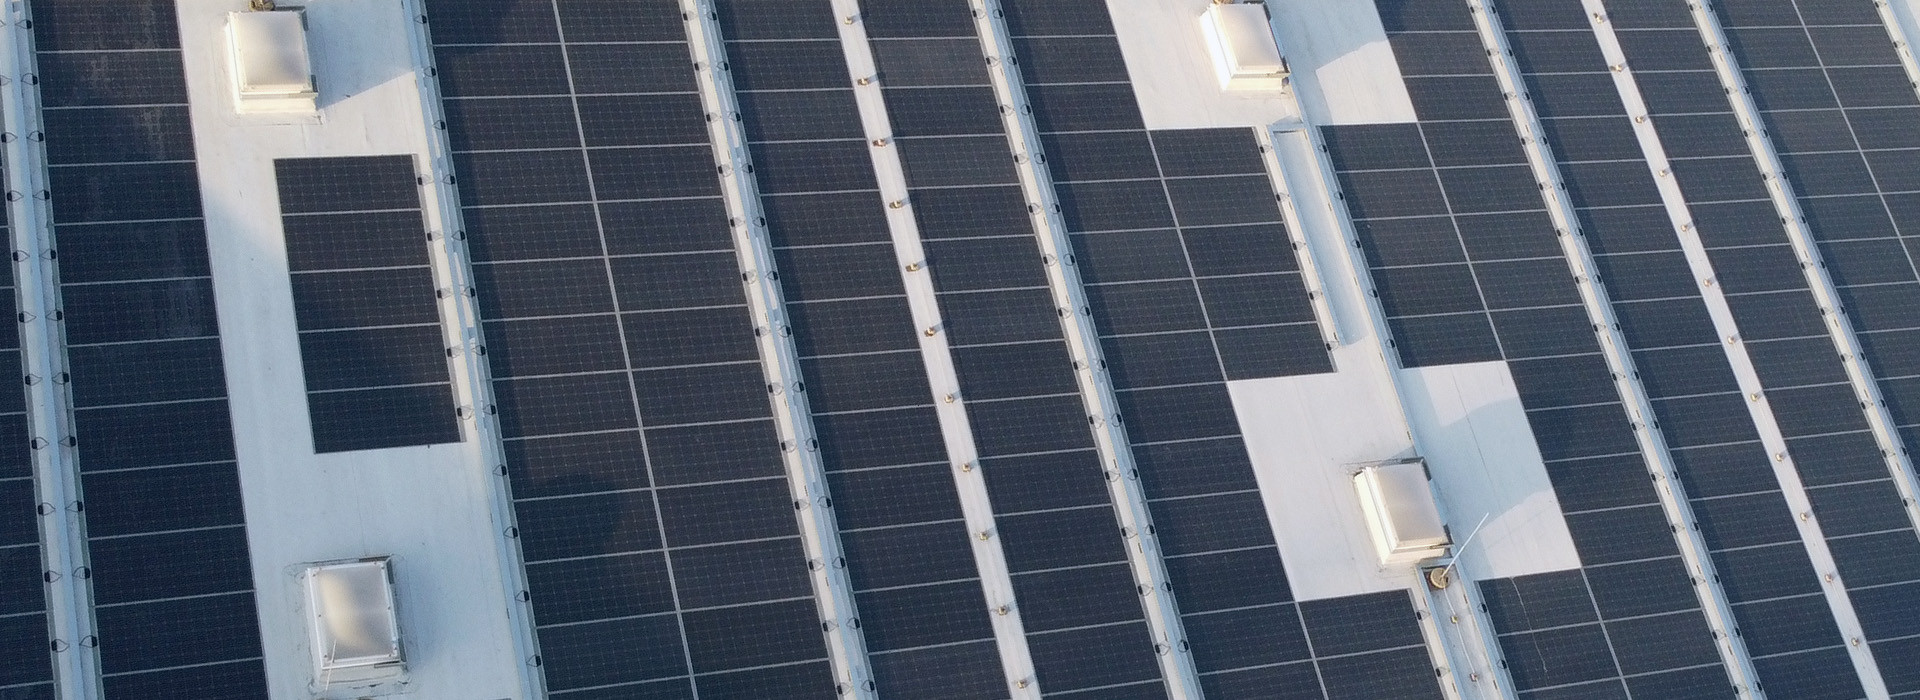 Photovoltaics for foil and bitumen flat roofs